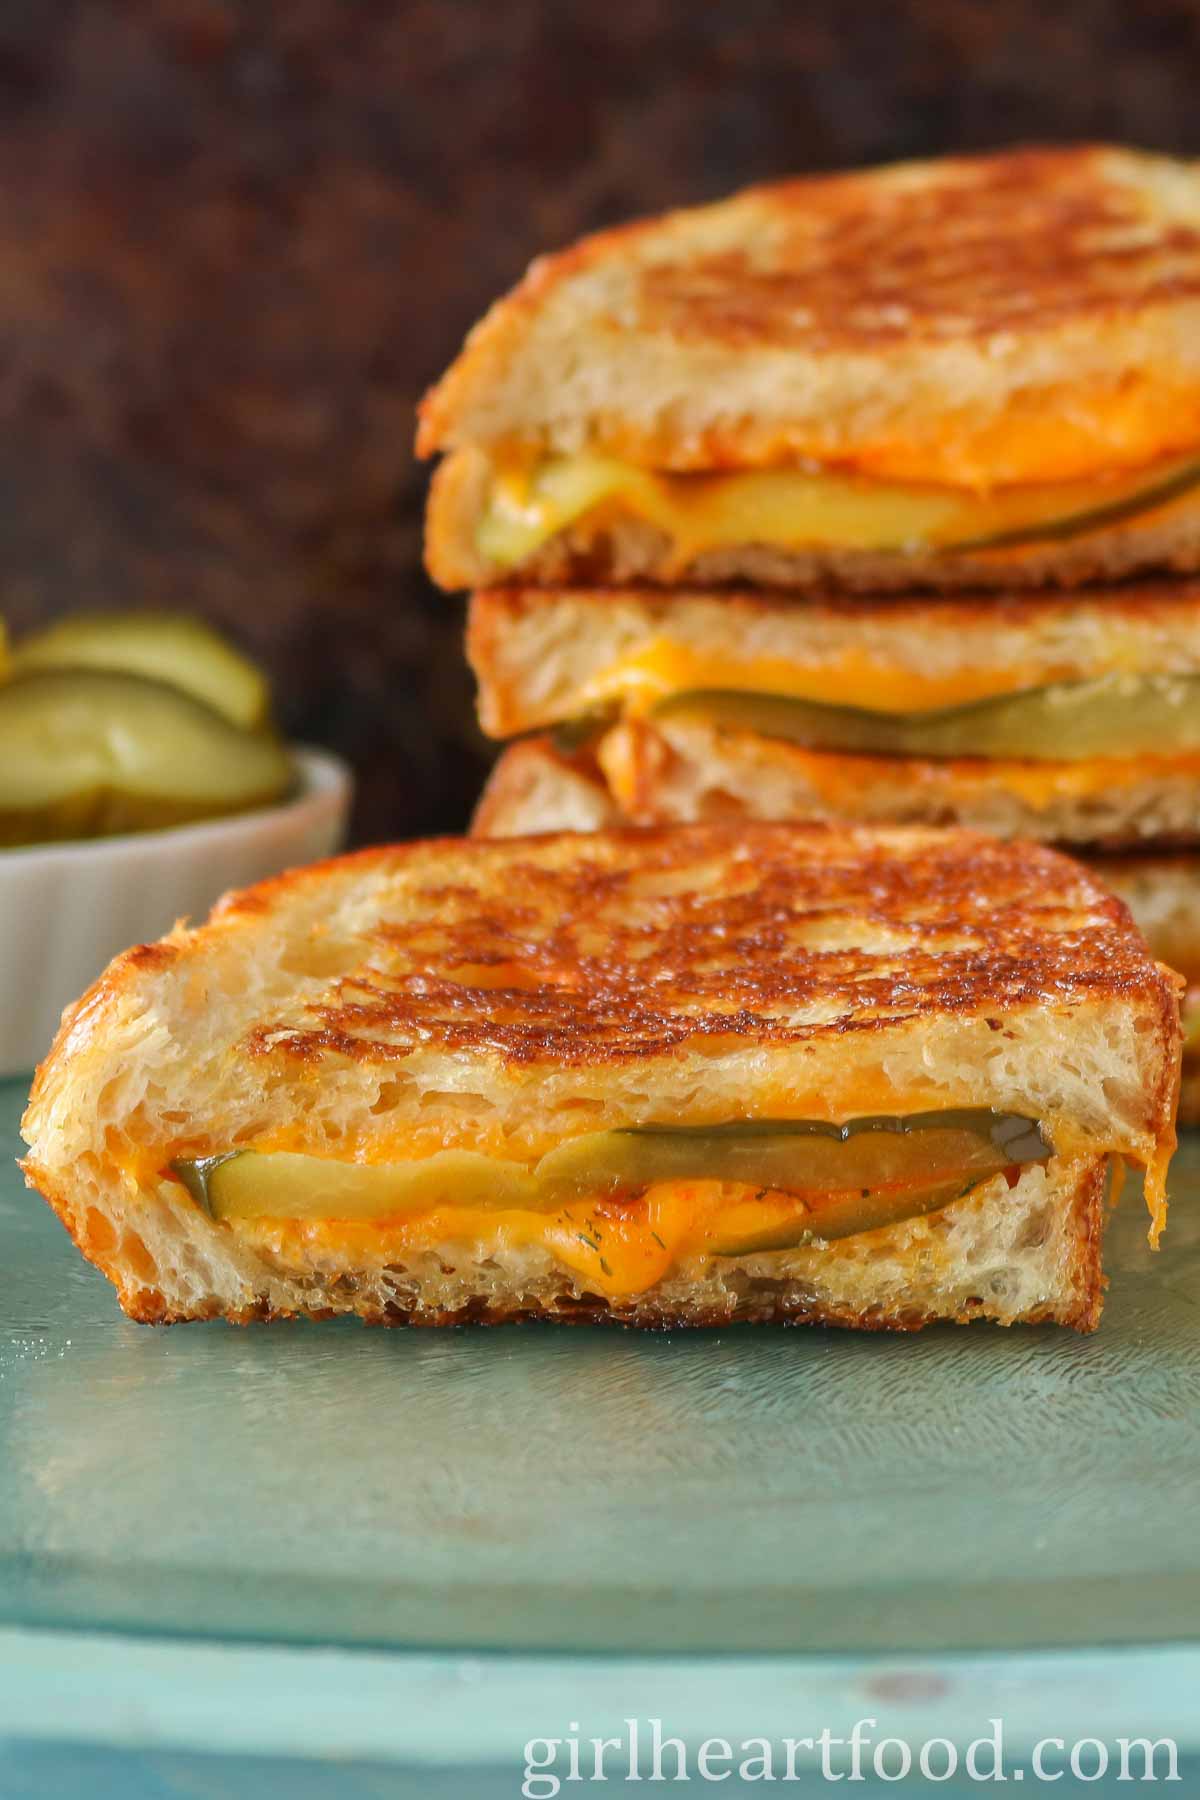 Half of a pickle grilled cheese sandwich in front of a stack of sandwiches & dish of pickles.